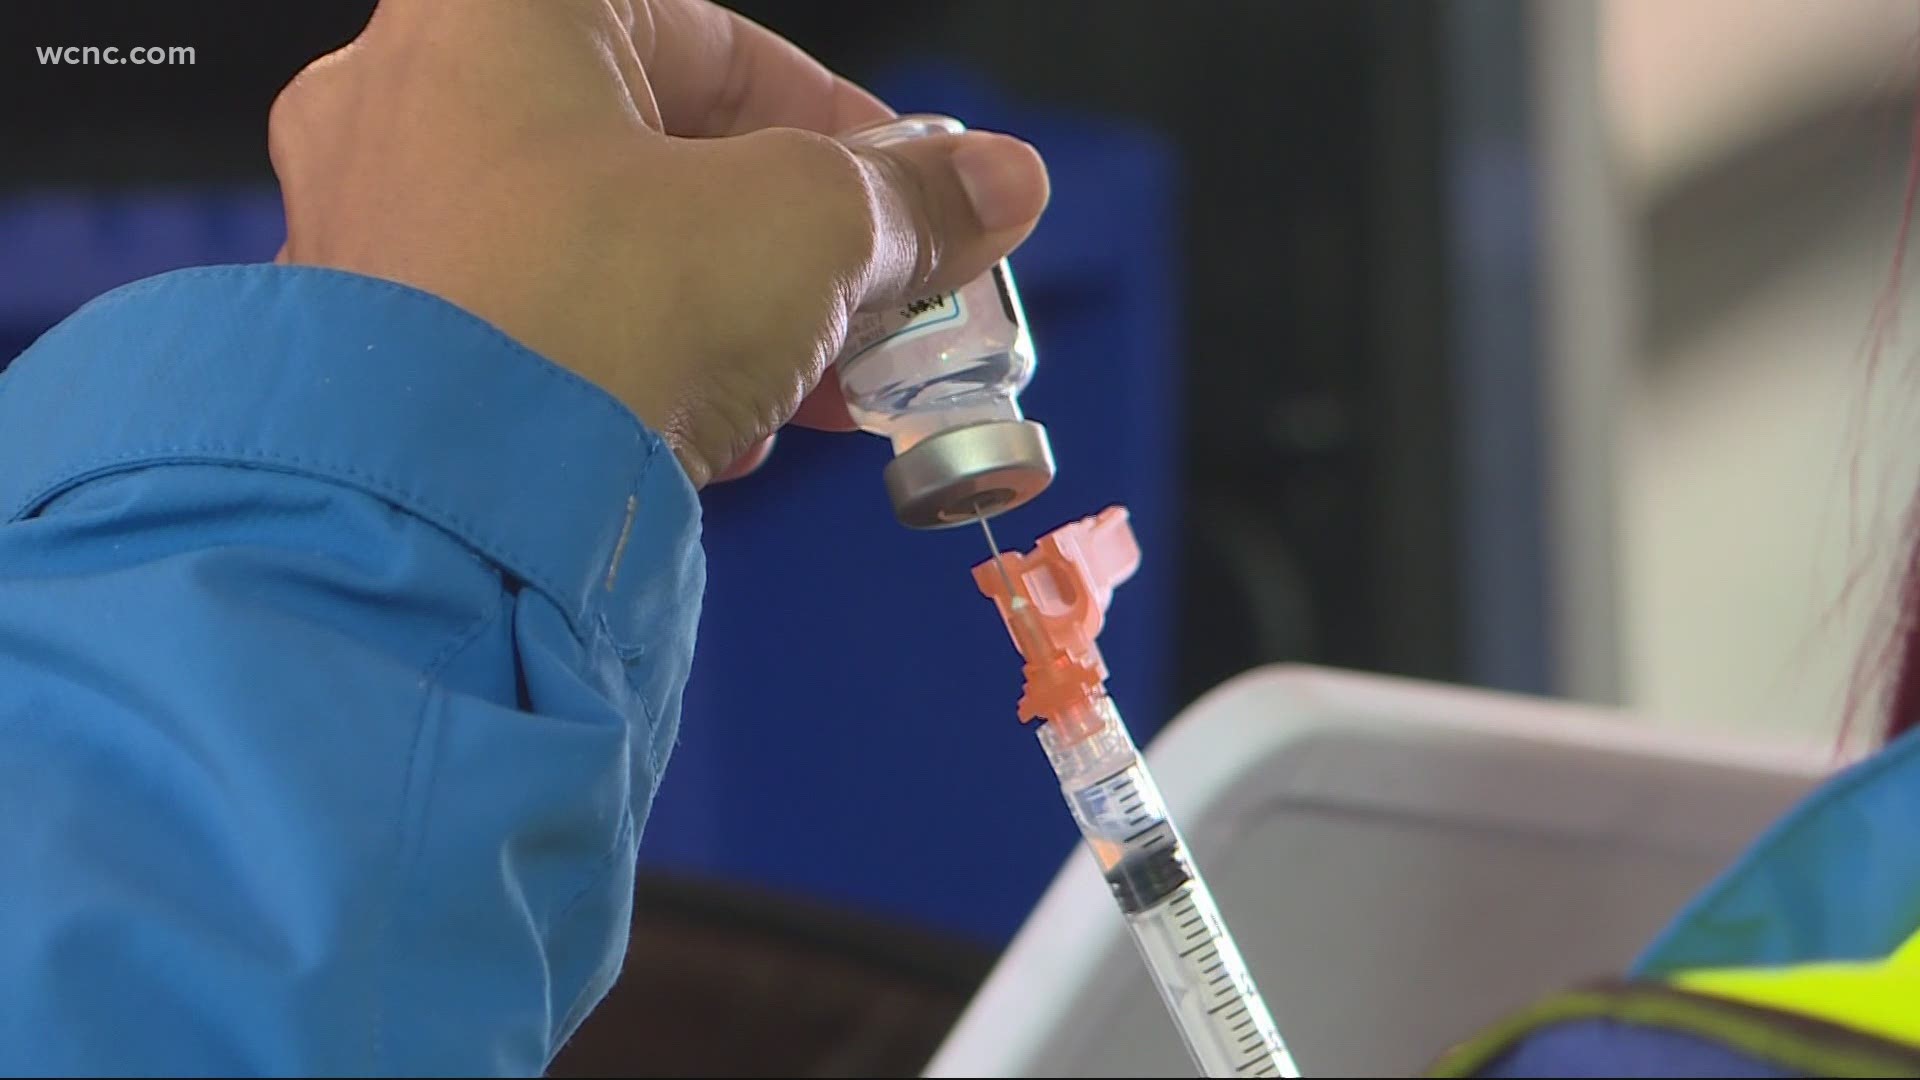 Several public health departments postponed COVID-19 vaccine clinics because they didn't receive their vaccine shipments due to winter weather in the Midwest.